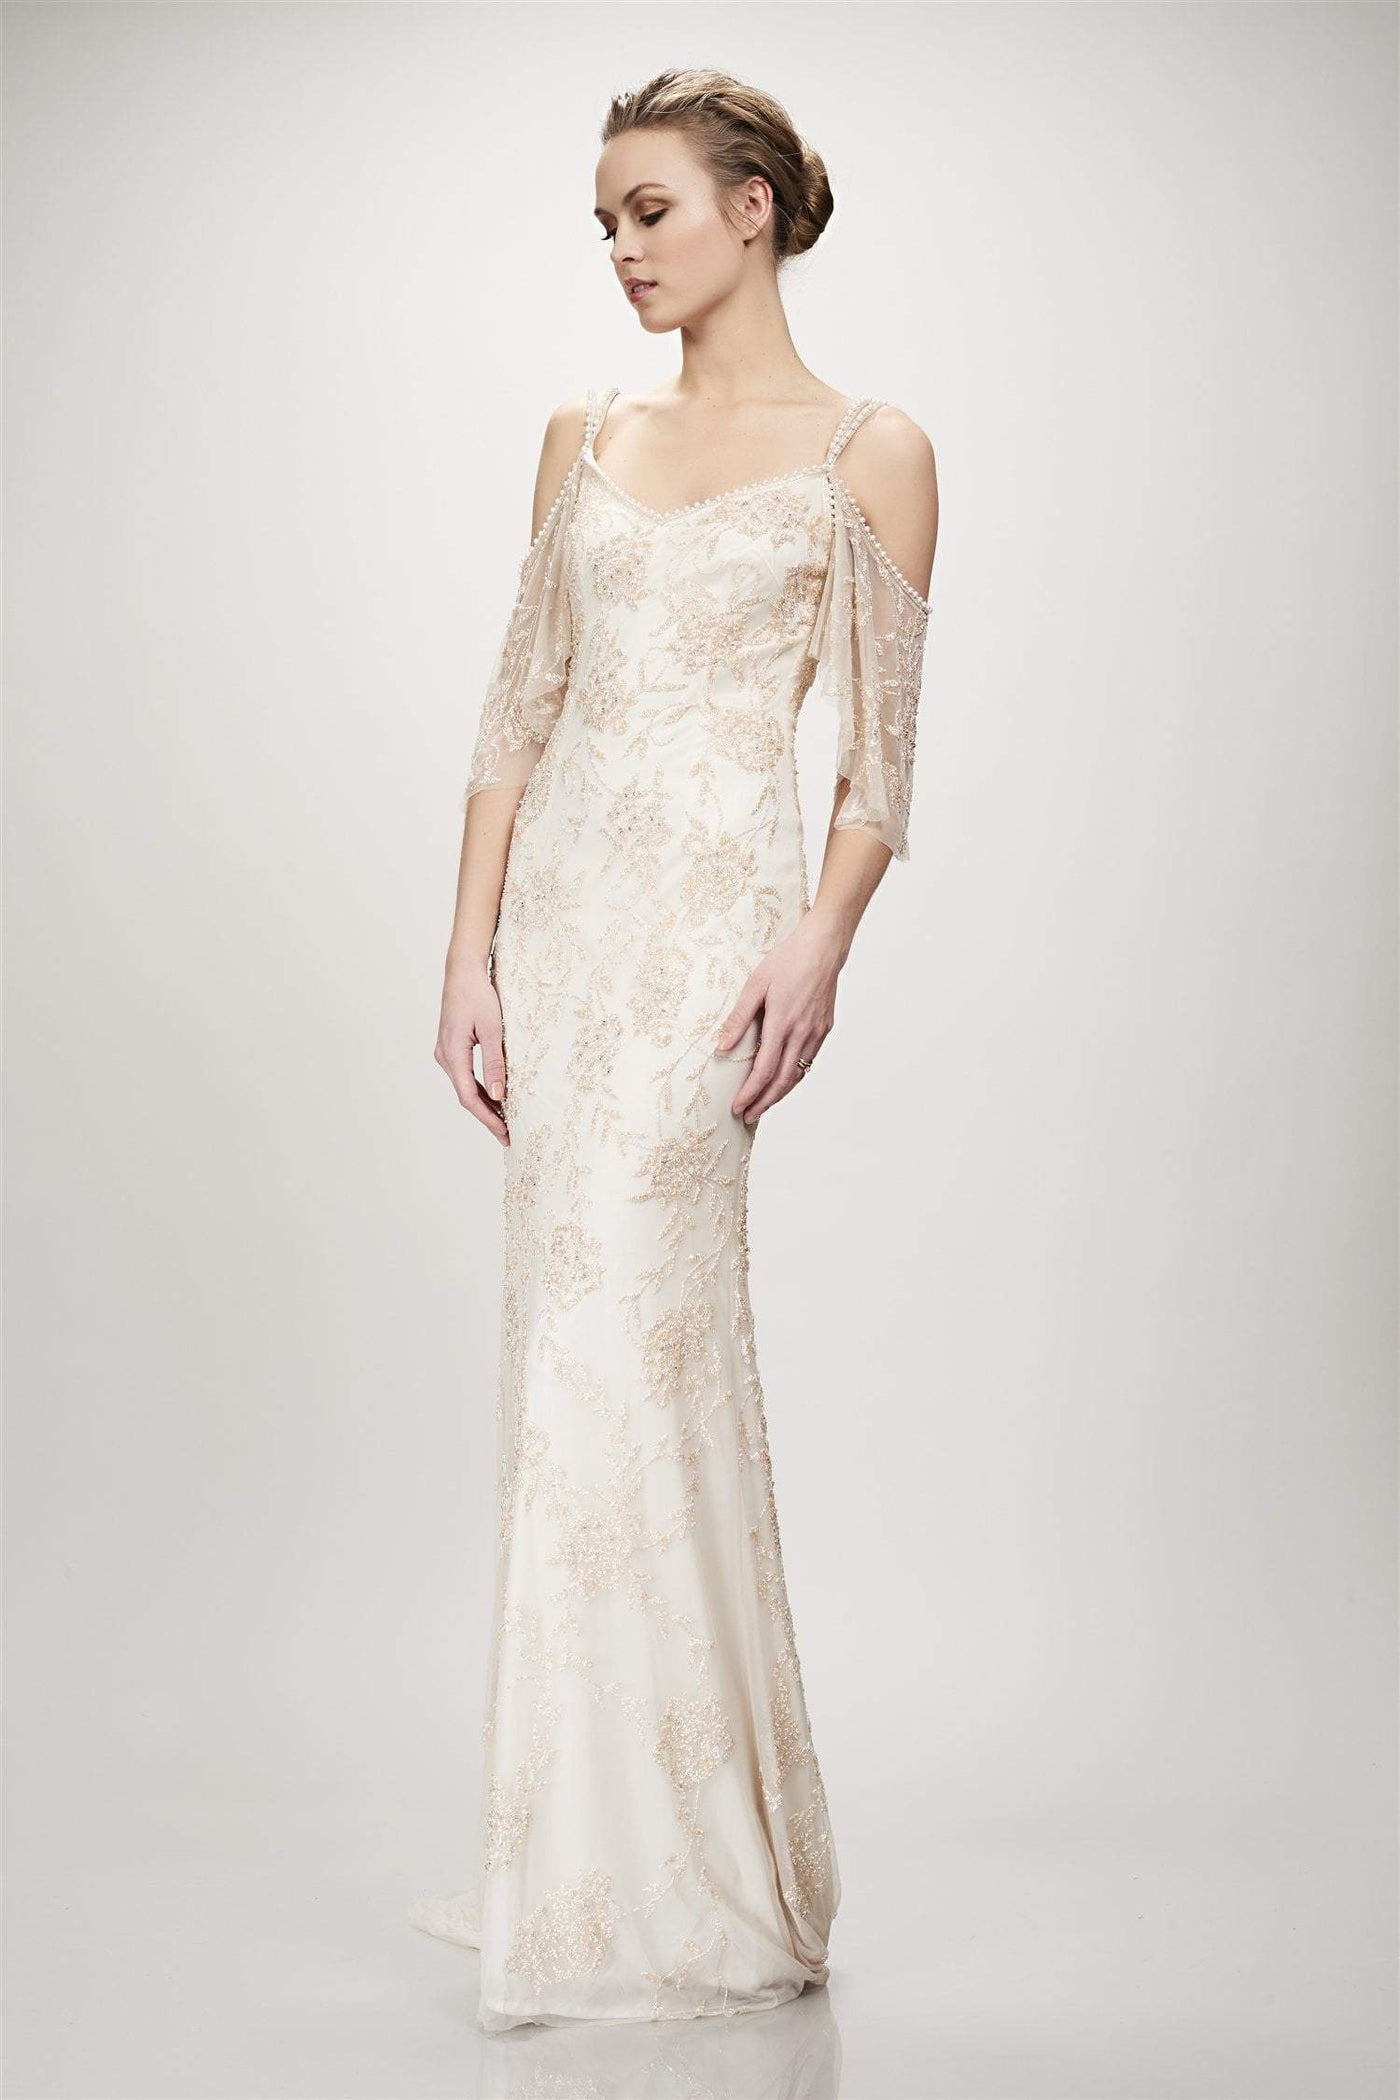 Theia - 890425 Draping Quarter Sleeve Beaded Long Sheath Gown In Ivory